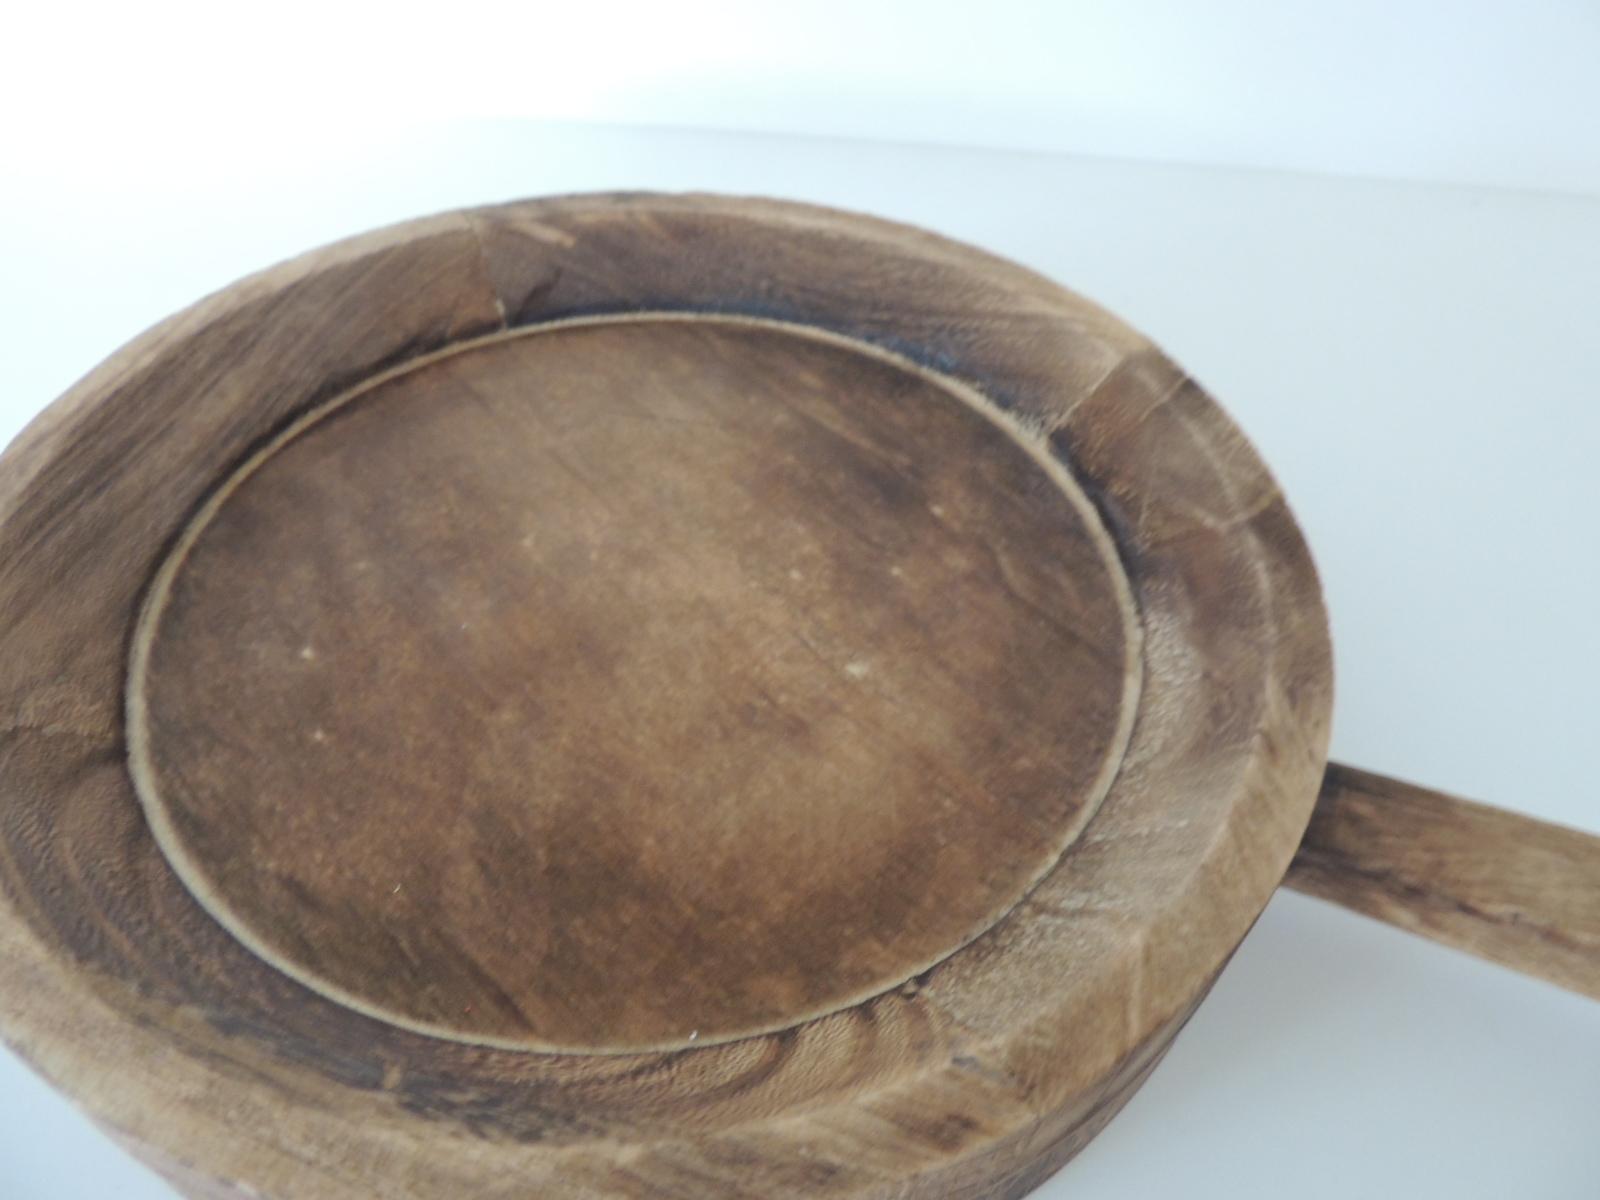 Indian Round Wooden Artisanal Bowl with Handle